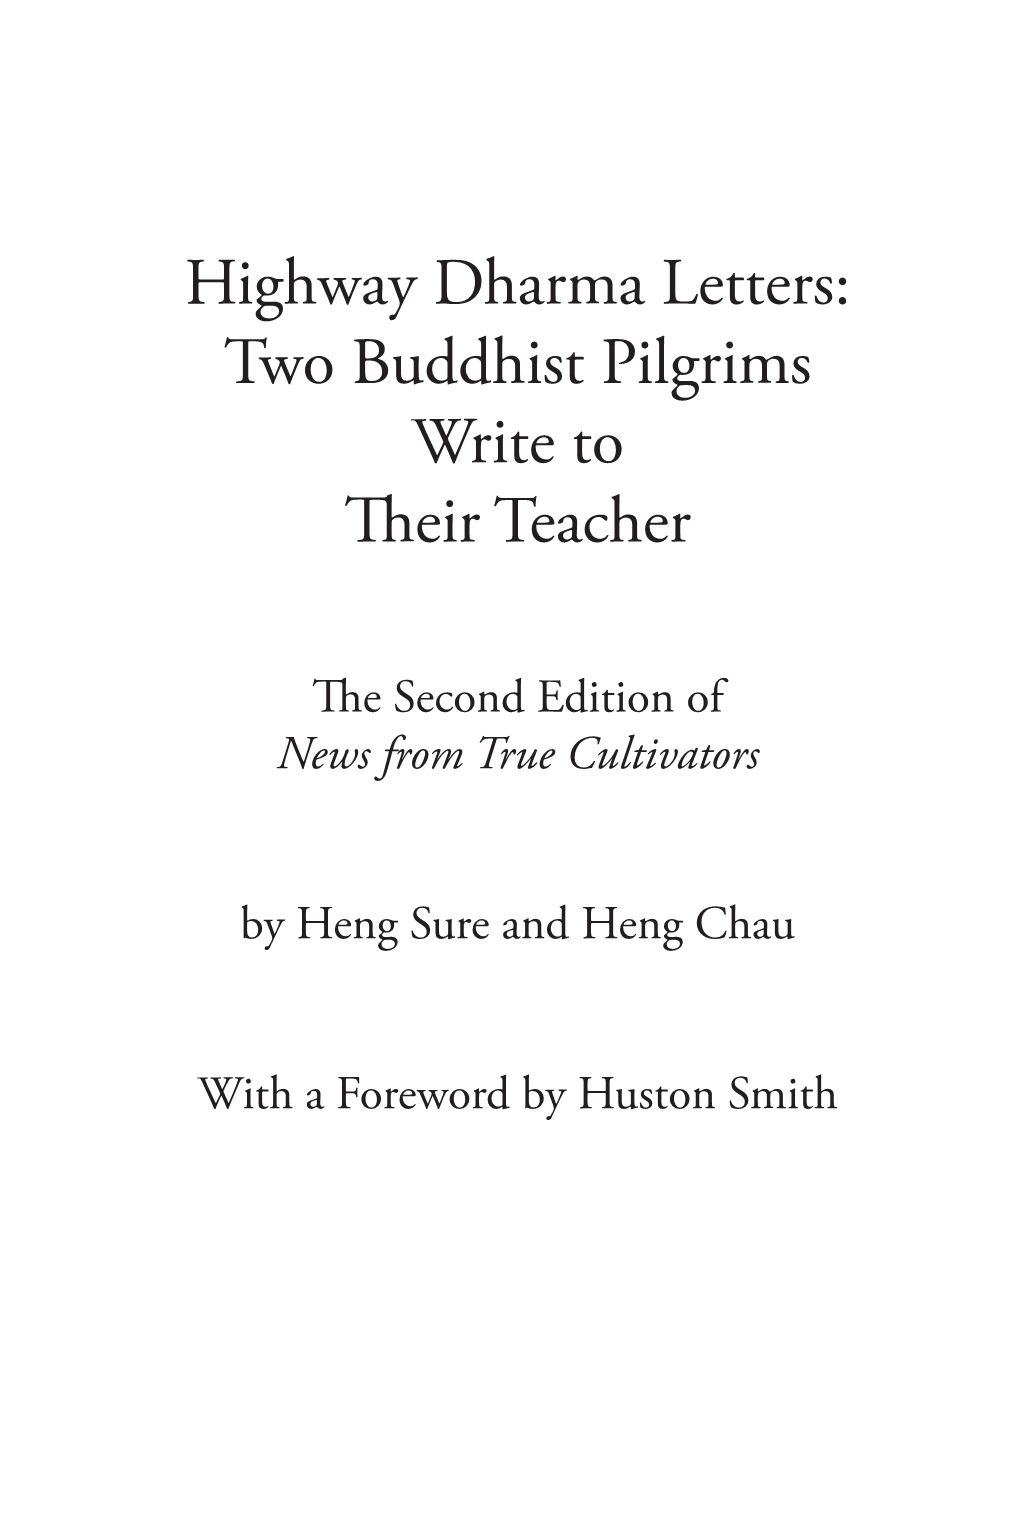 Highway Dharma Letters: Two Buddhist Pilgrims Write to Their Teacher